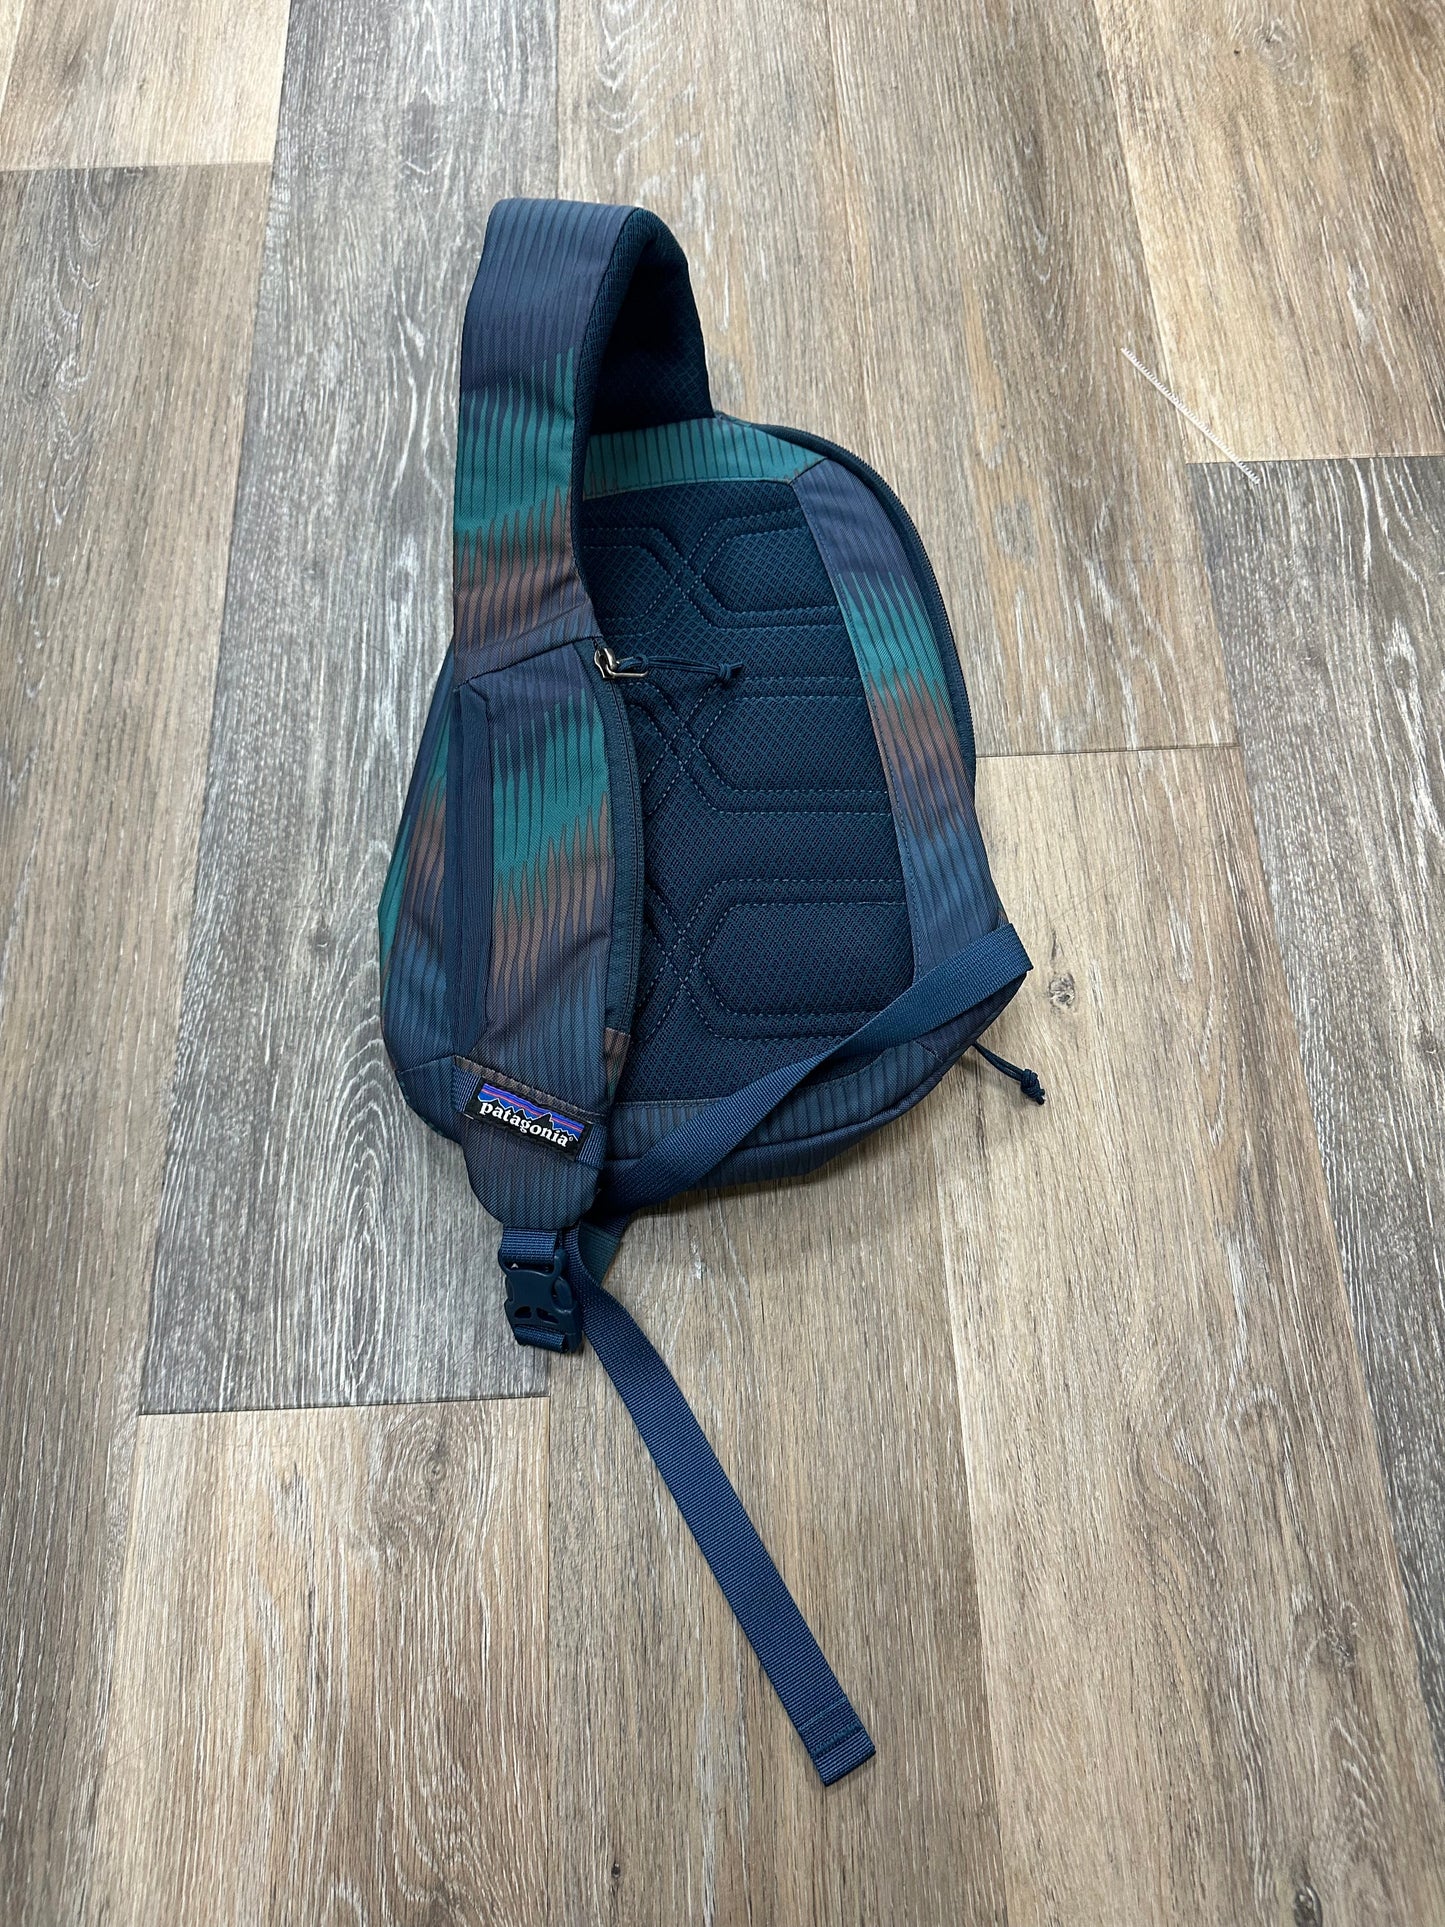 Backpack By Patagonia  Size: Medium